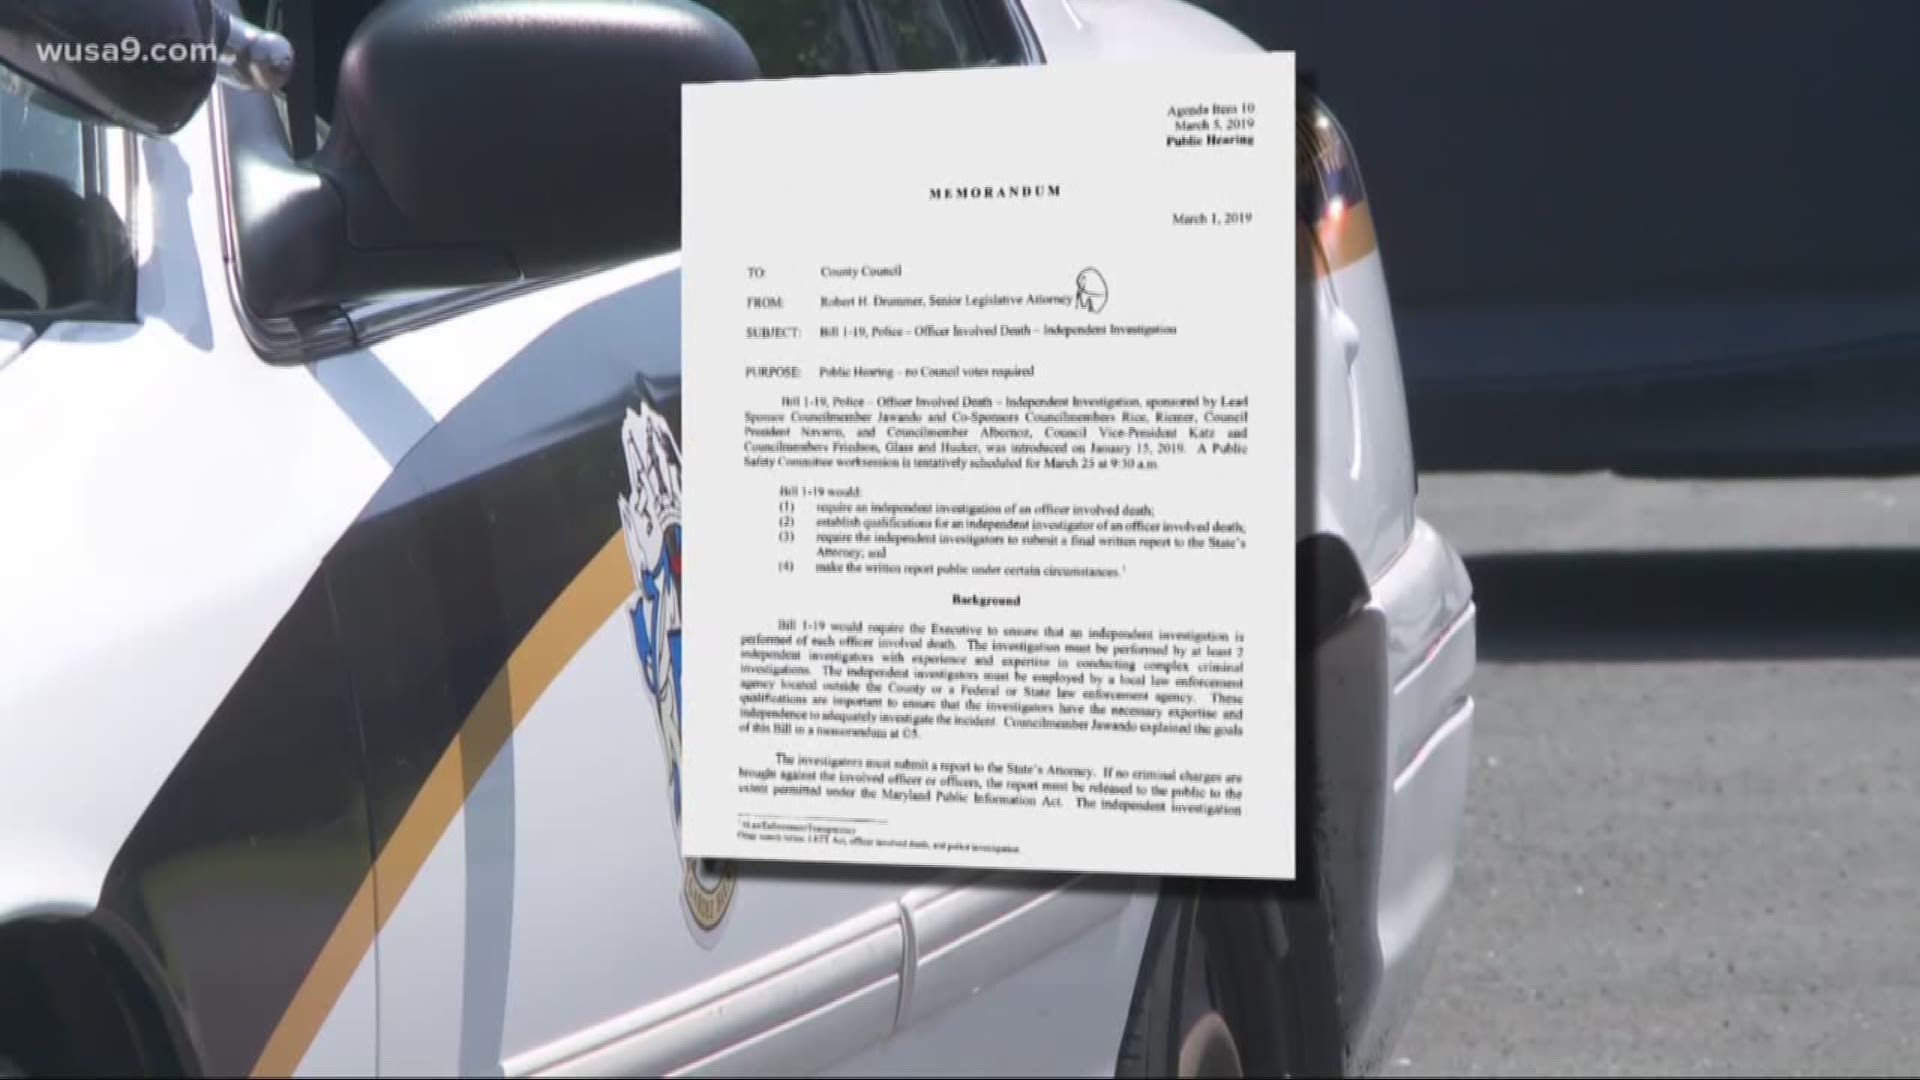 A new proposal in Montgomery County would require an independent investigation to take place after an officer-involved death takes place in the county.